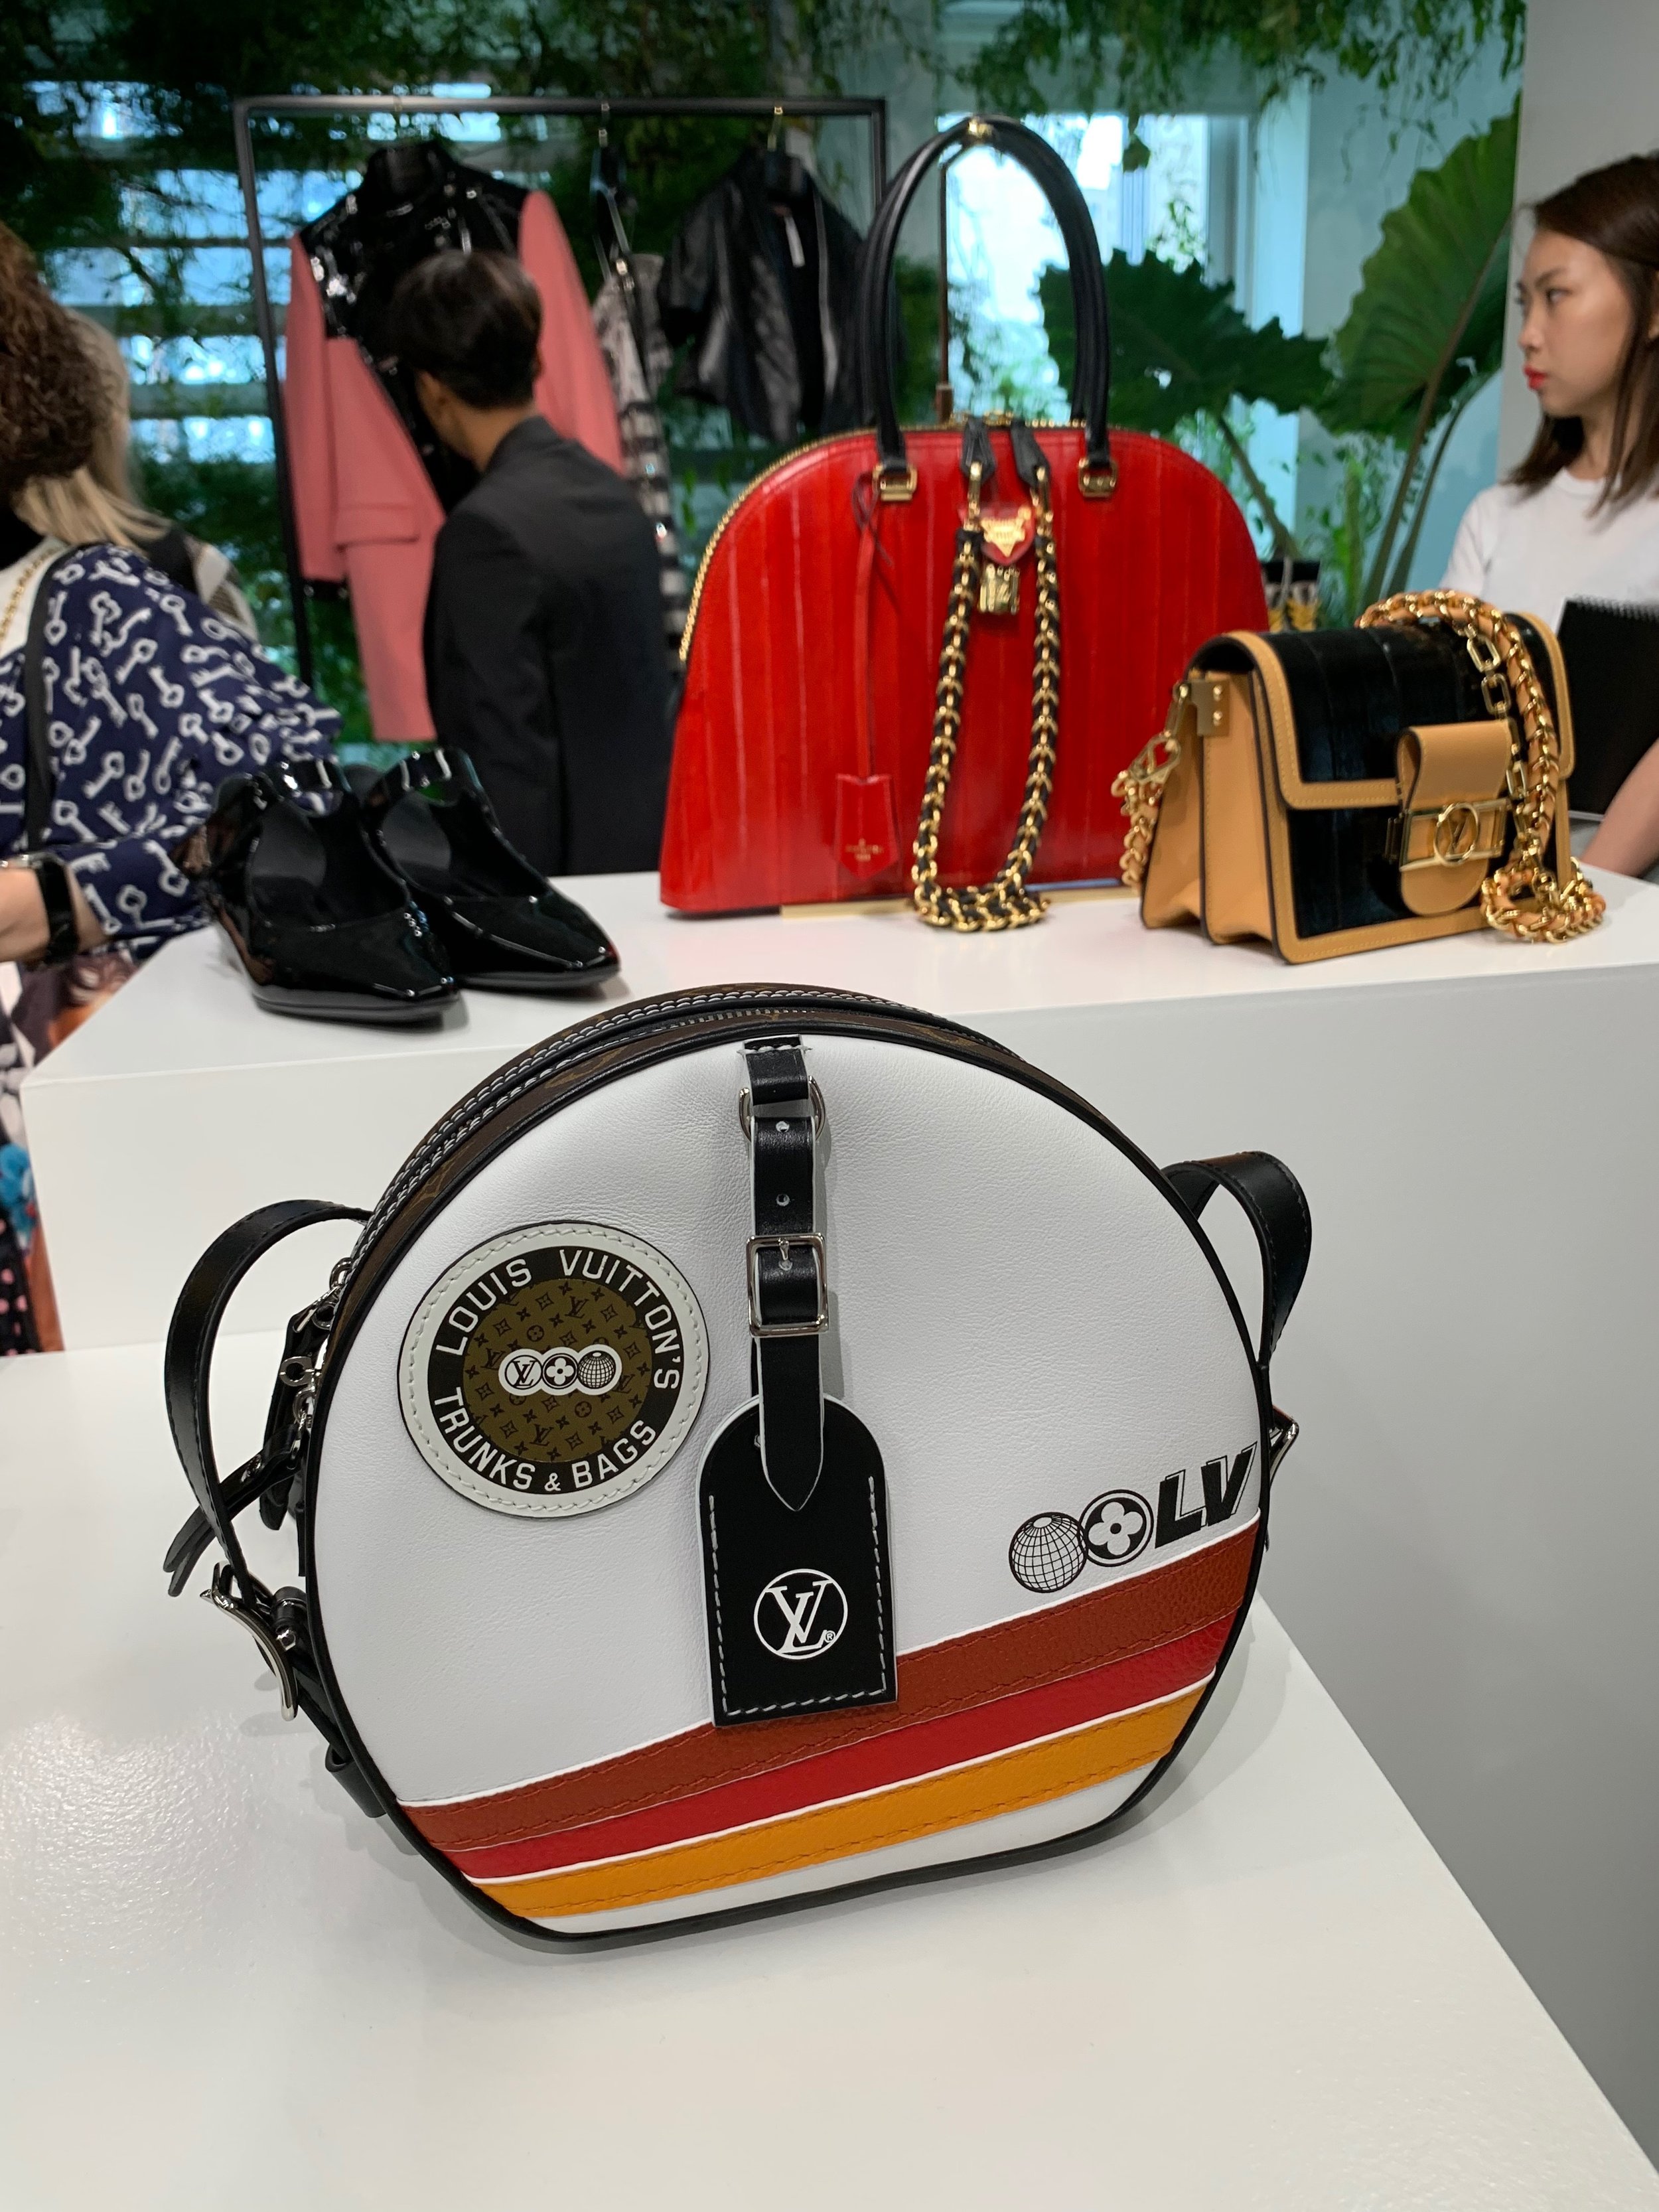 My Louis Vuitton Cruise 2020 Experience — minaesthetic